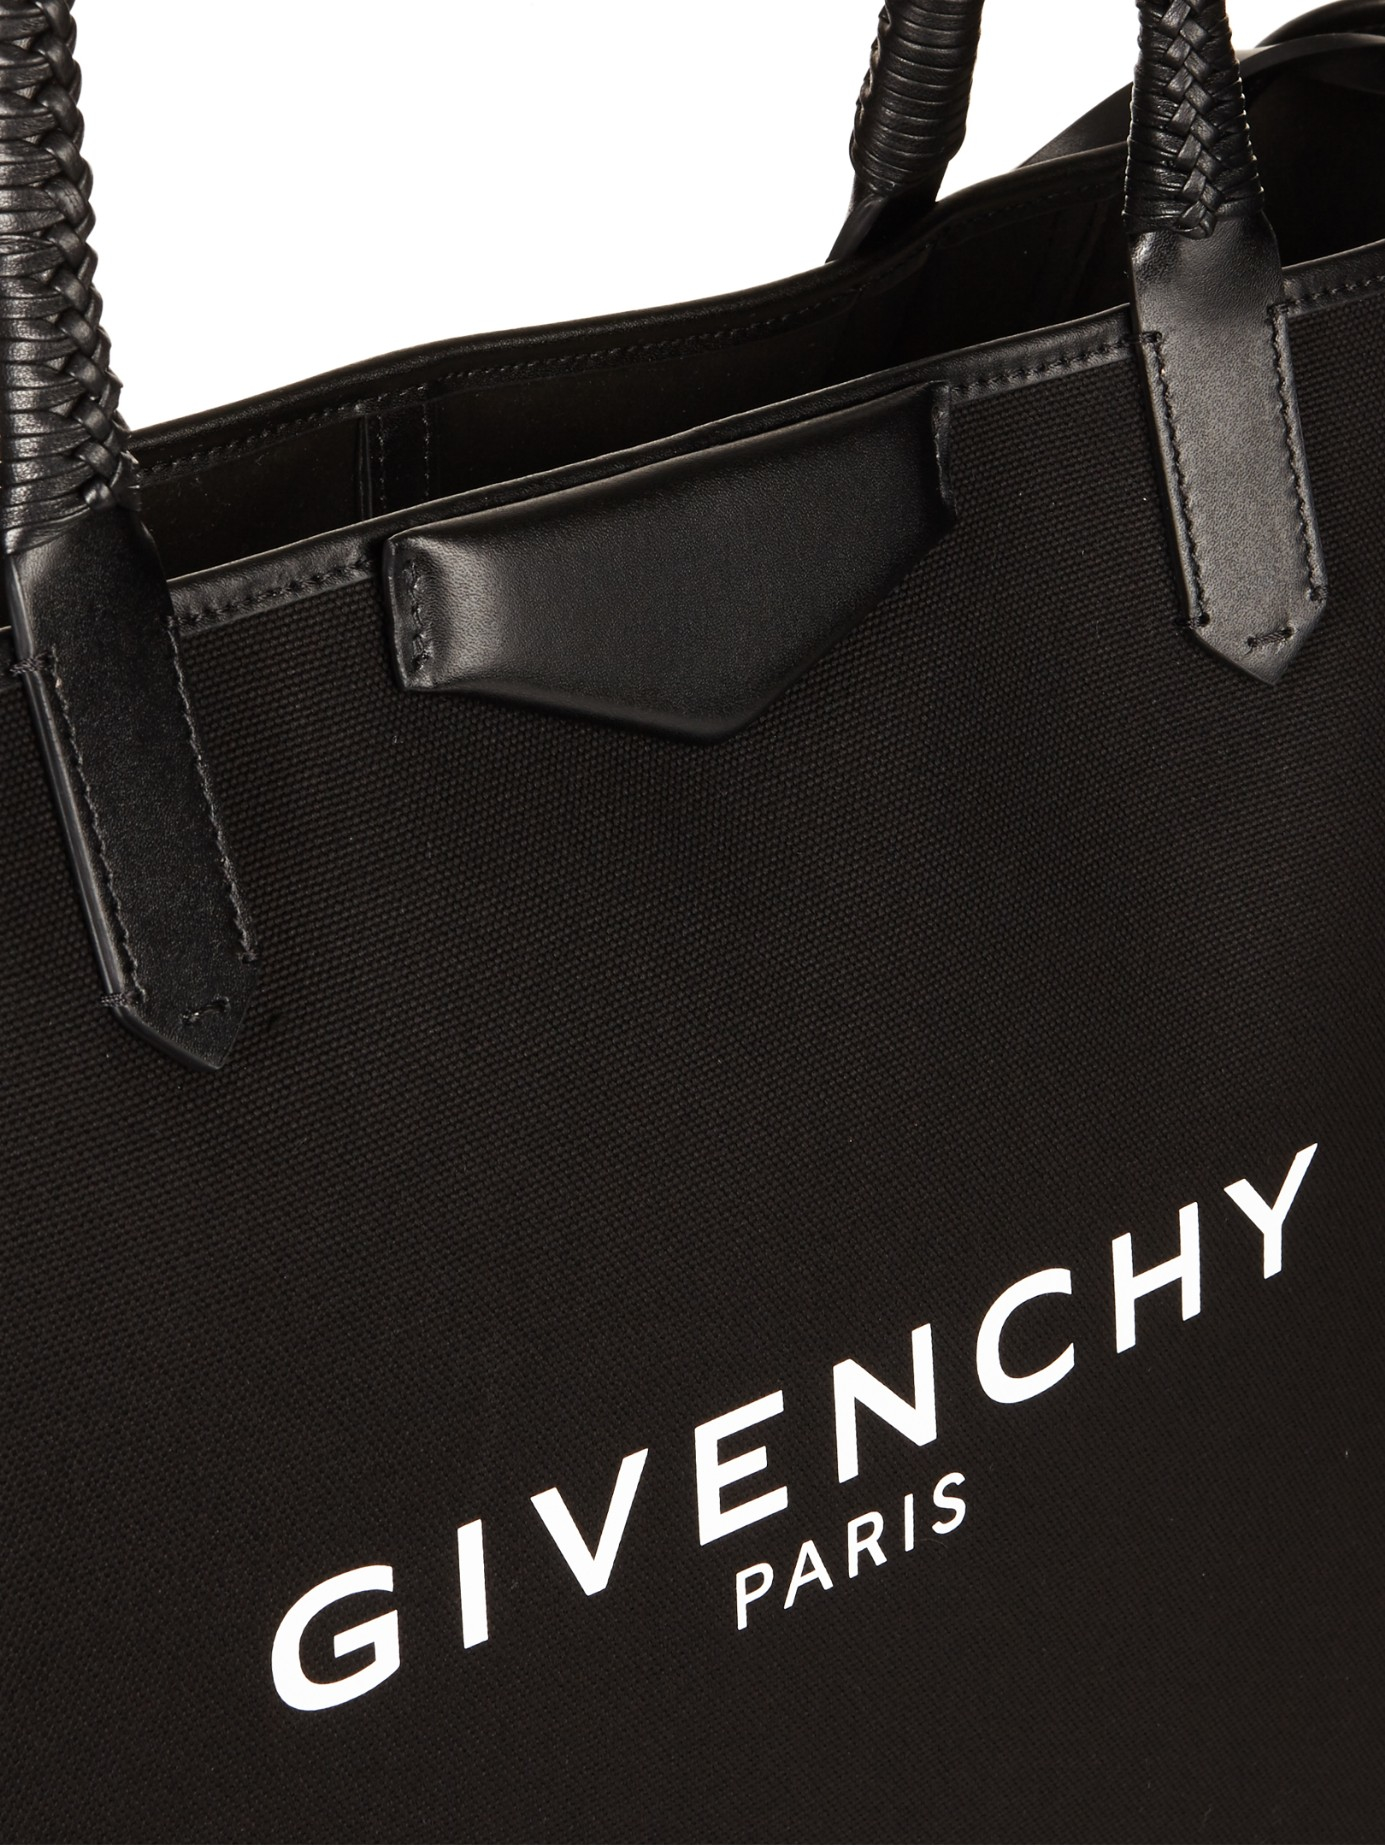 GIVENCHY Antigona - Large Black Coated Canvas Tote w/Dog Graphic + Zipper  Pouch